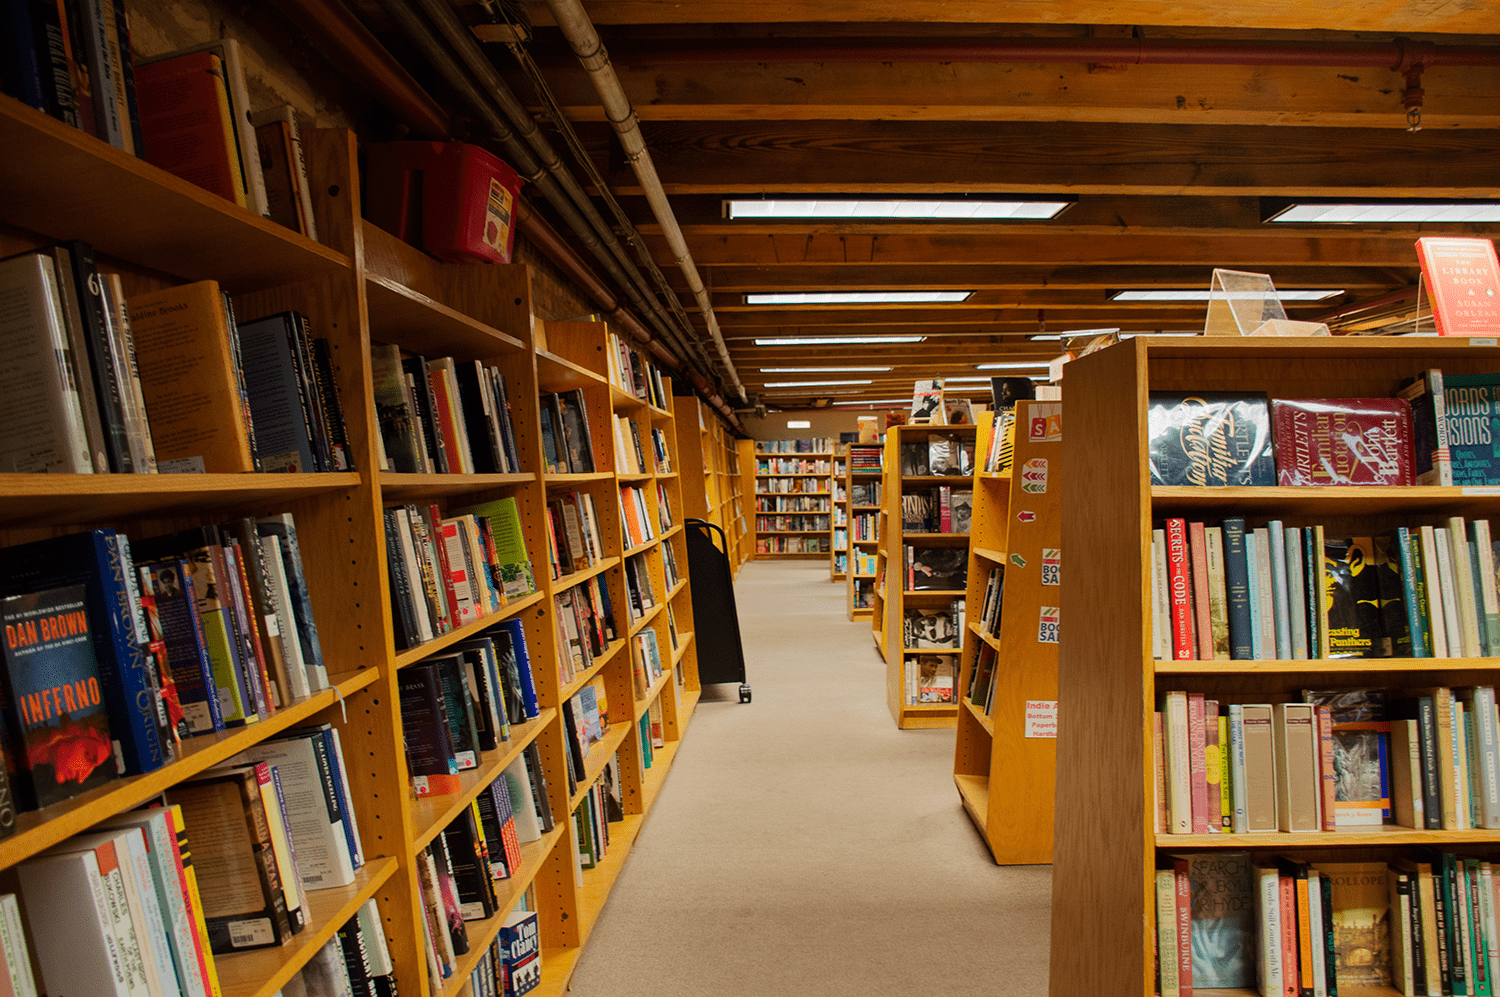 Colorful aisles of bookshelves in the basement of the store.